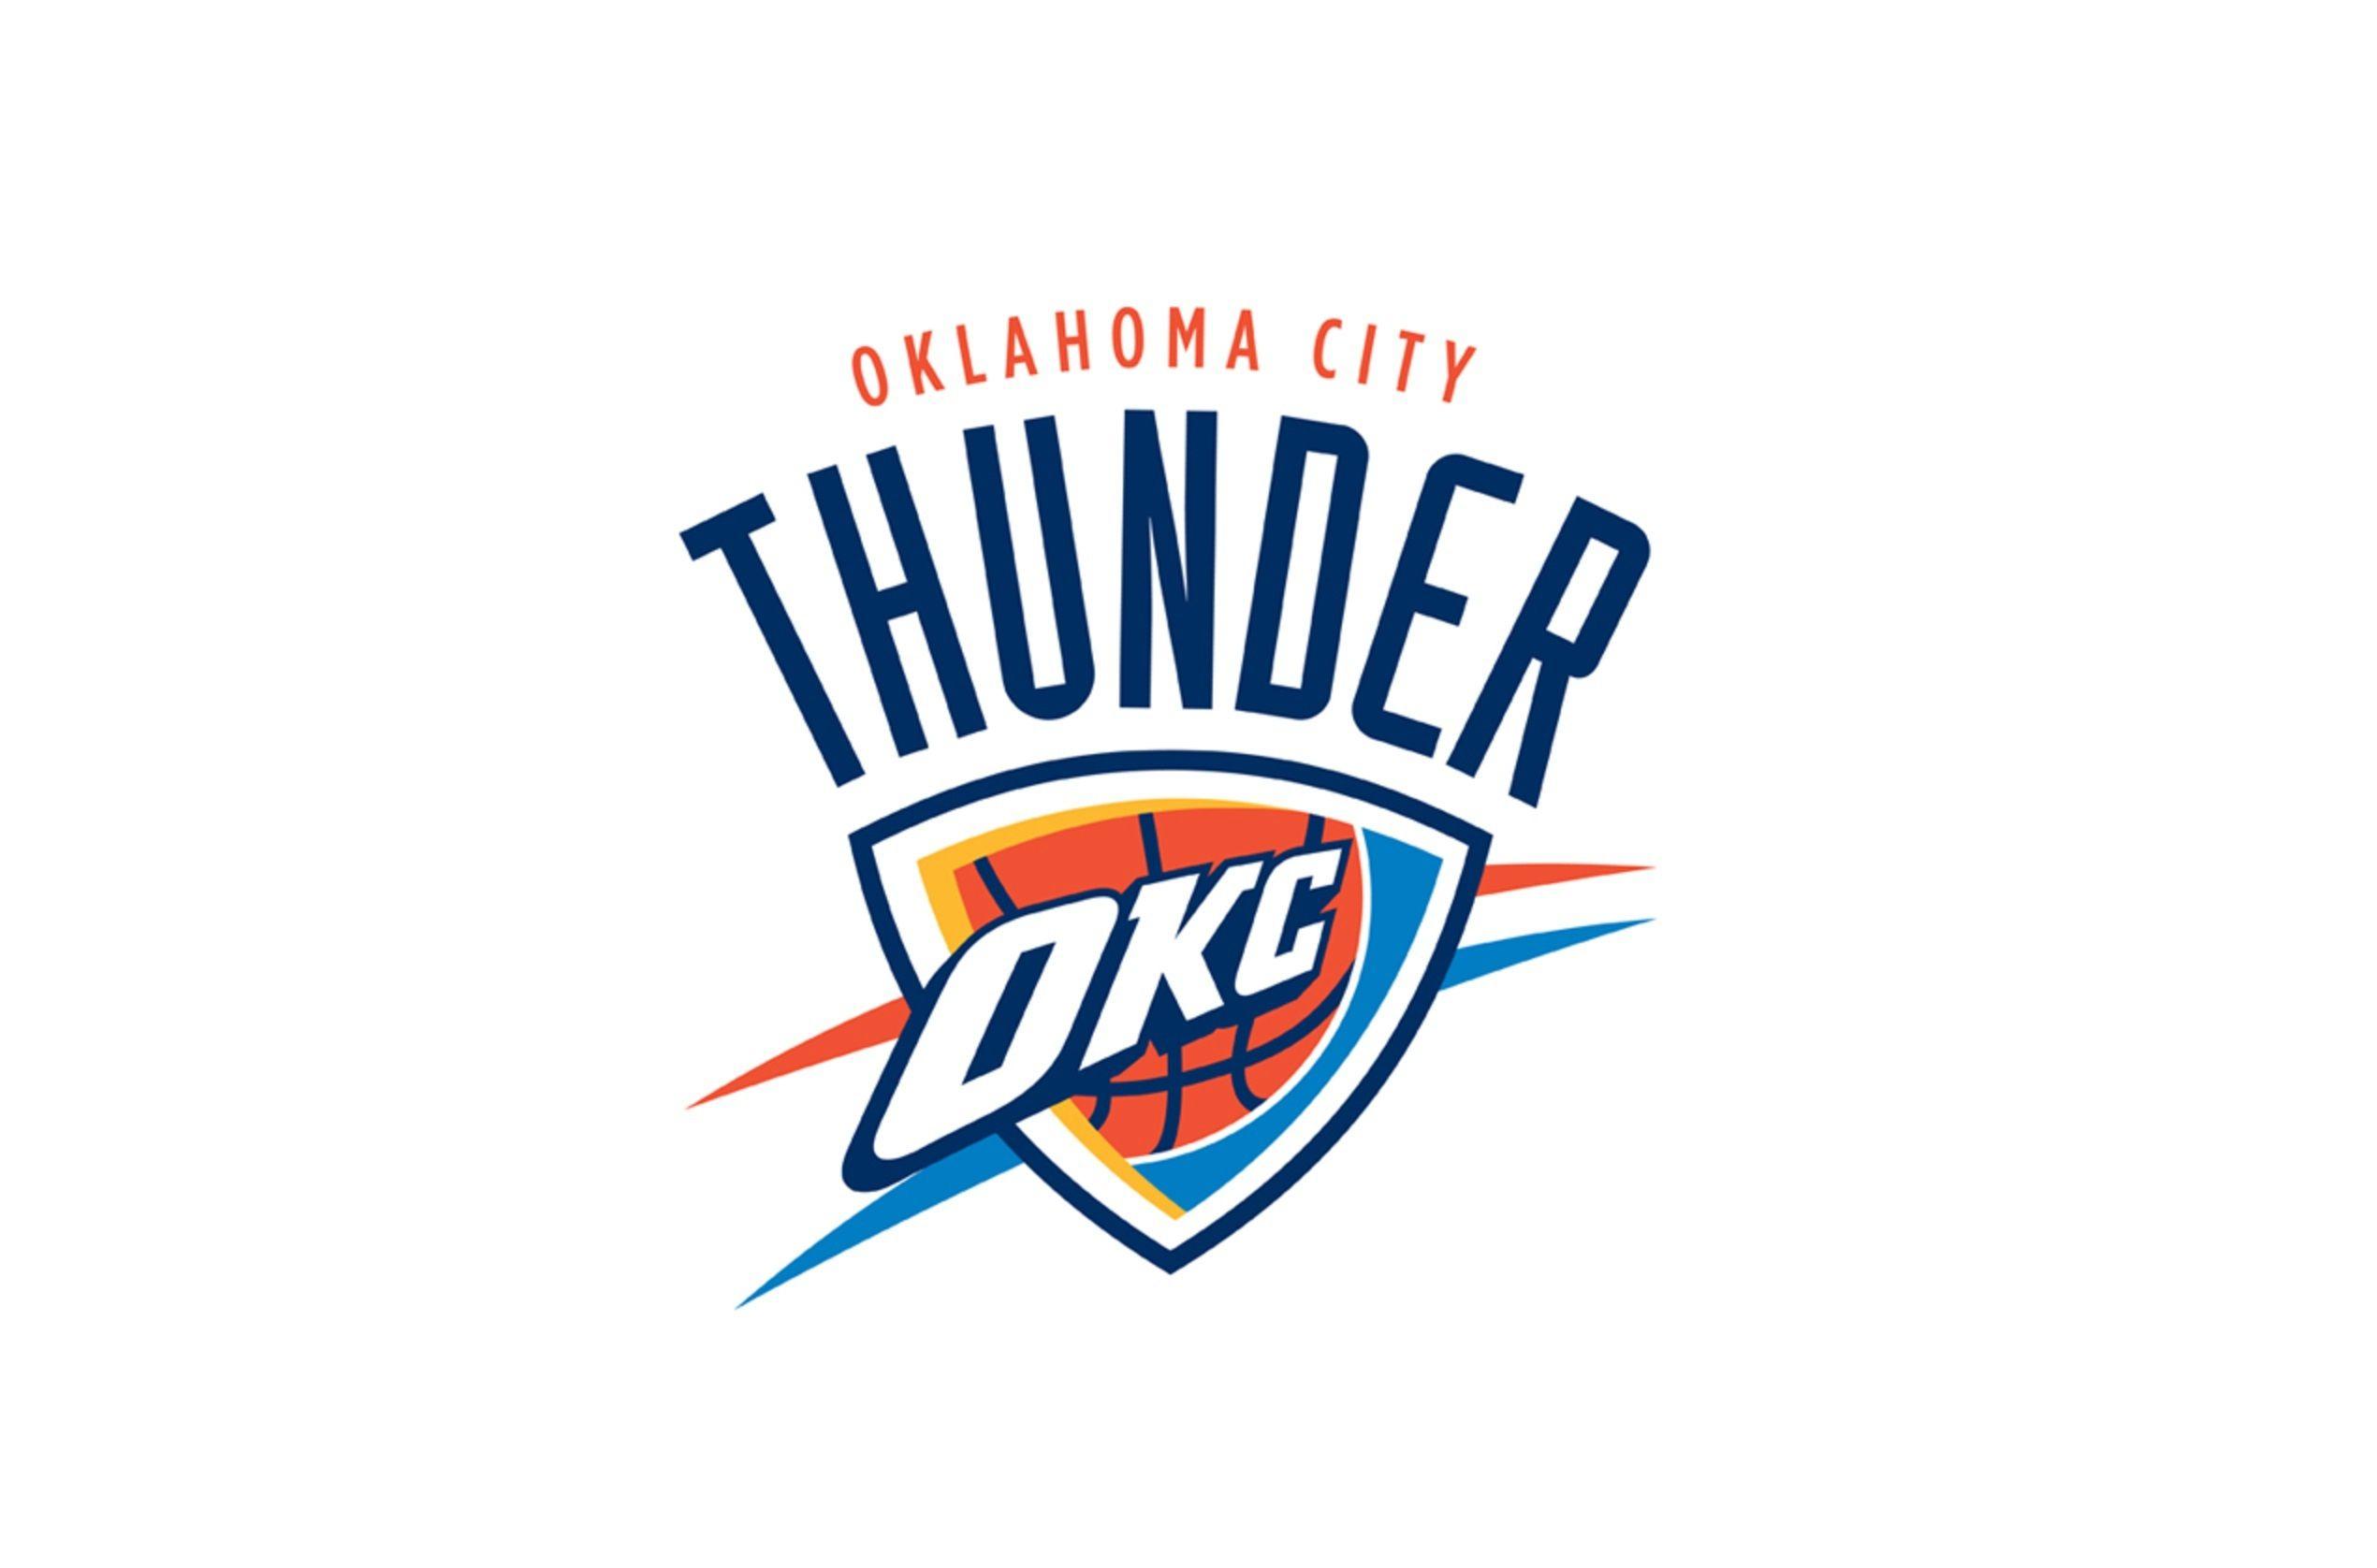 Oklahoma City Thunder Wallpapers Image Photos Pictures Backgrounds